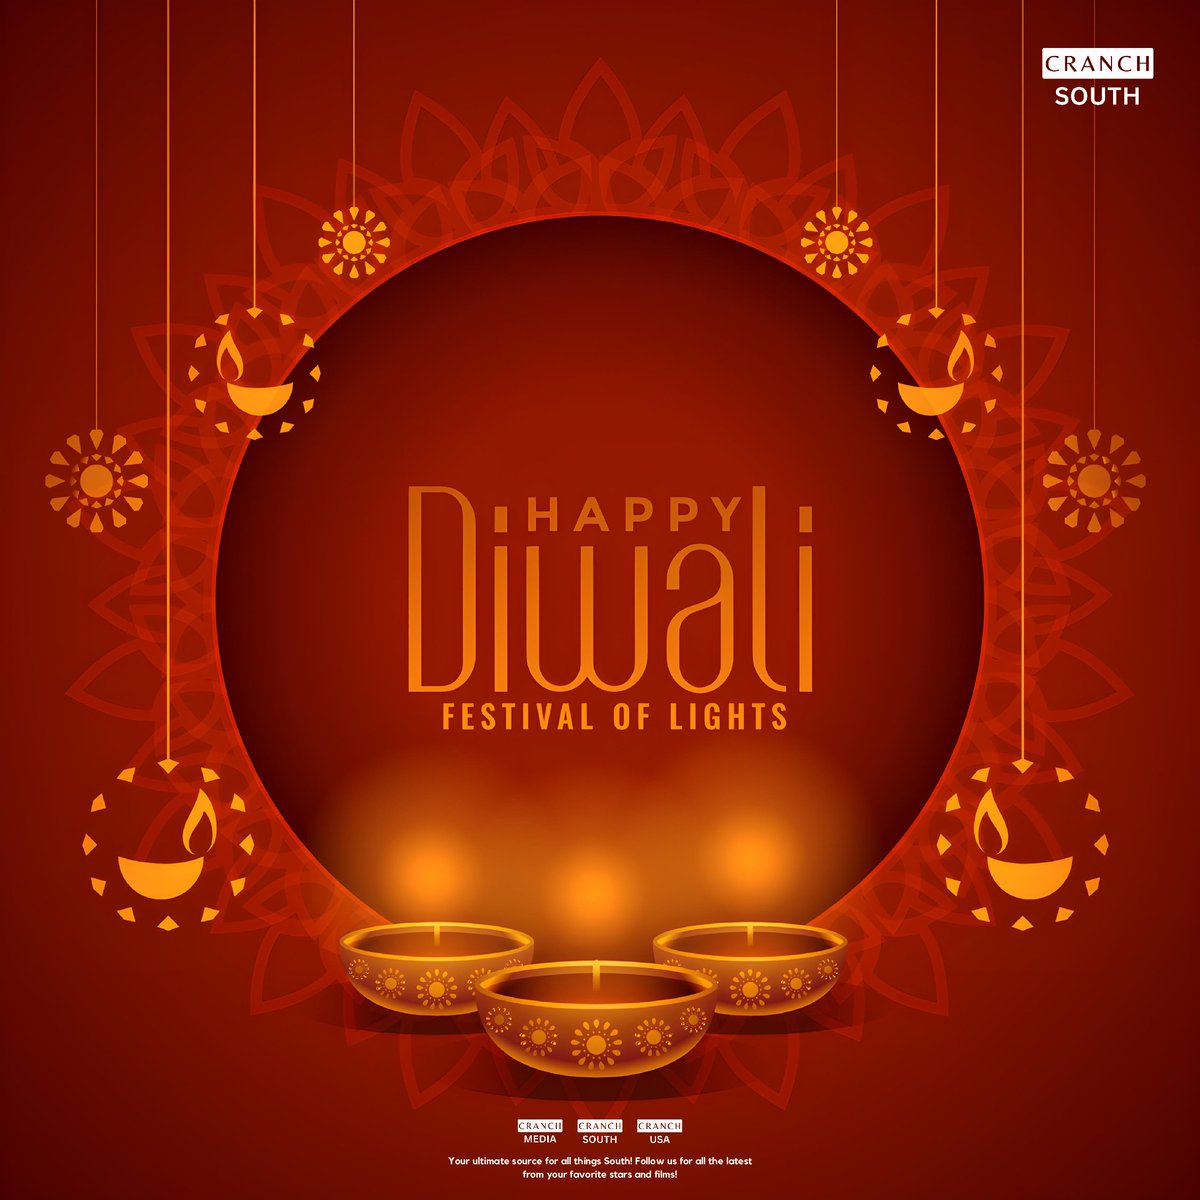 Shining bright like the #Diwali diyas, our  #CranchSouth family wishes you a festival filled with joy, light, and captivating stories! ✨🪔 #HappyDiwali 🎇
...
...
#NewsUpdate #News #Trending #DiwaliCelebration #Trend #MediaMagic #Tollywood #Mollywood #SouthCelebrity #DiwaliVibes